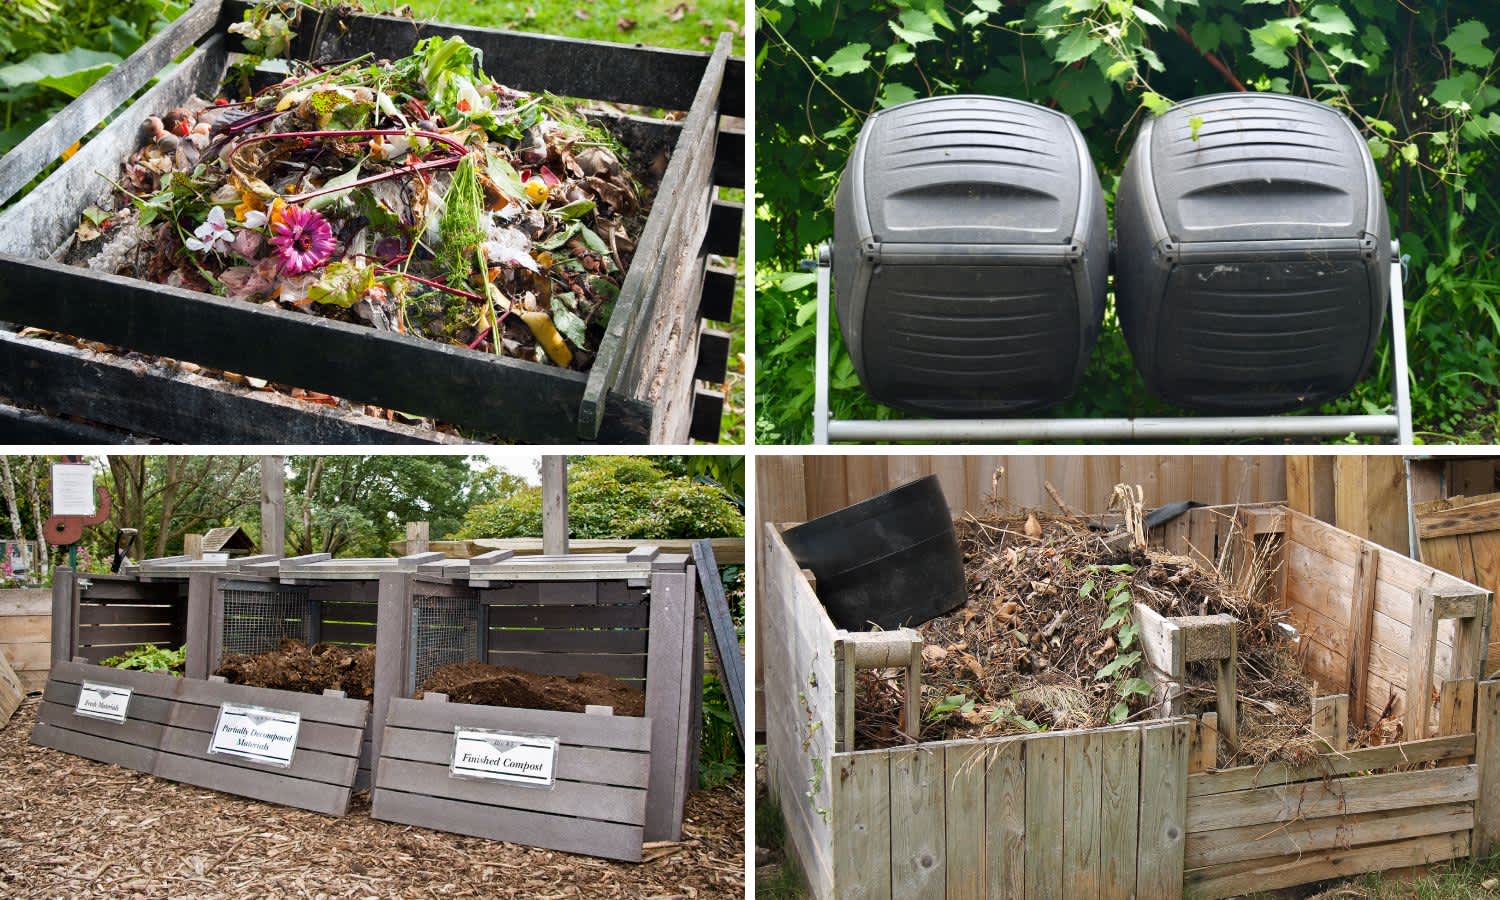 Different types of composting options